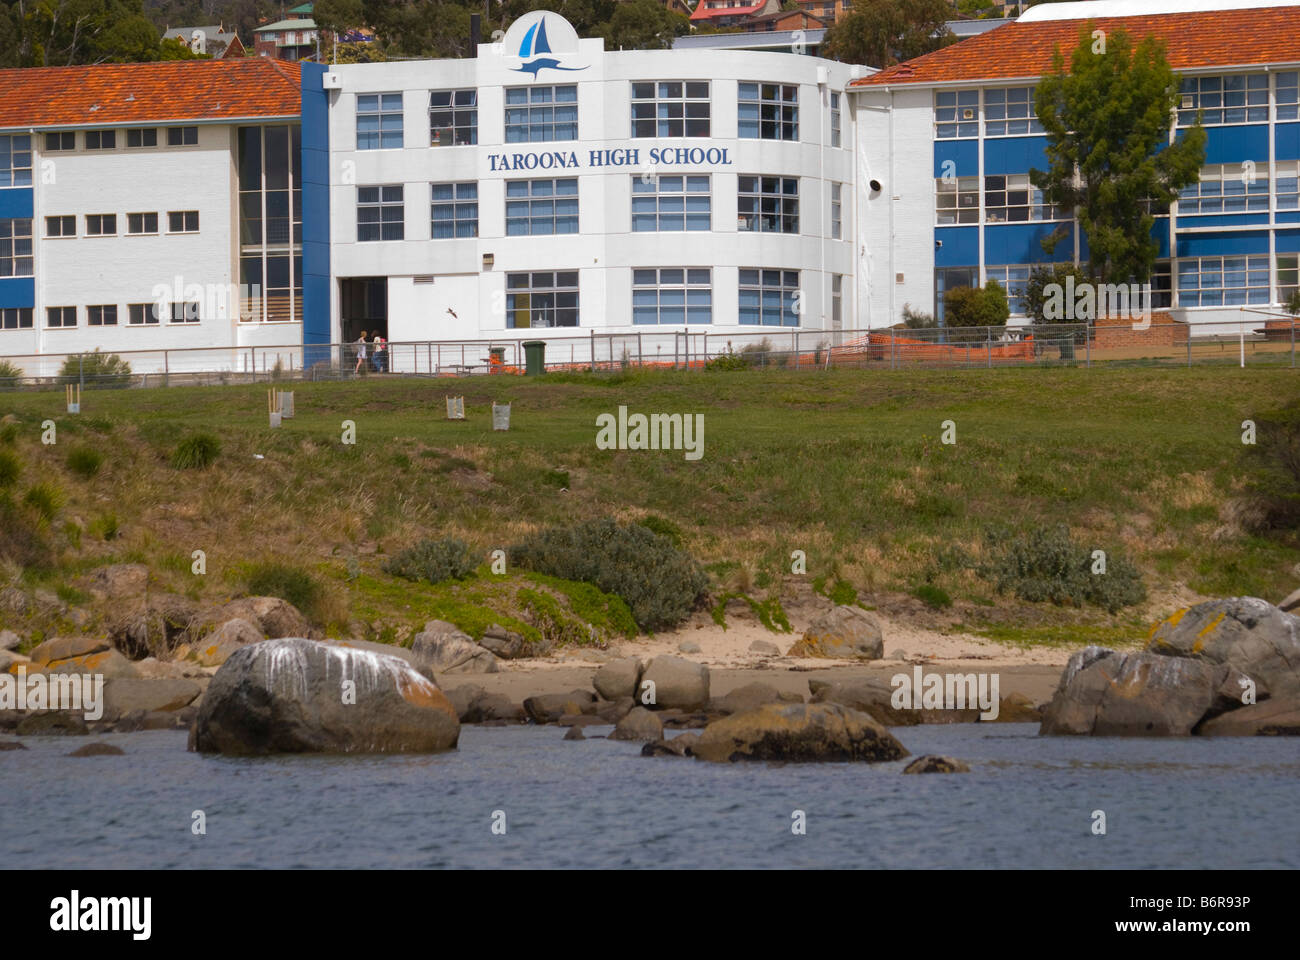 Taroona High School the ordinary Tasmanian public school attended by Princess Mary of Denmark, now Queen Mary cohort to King Frederick Stock Photo